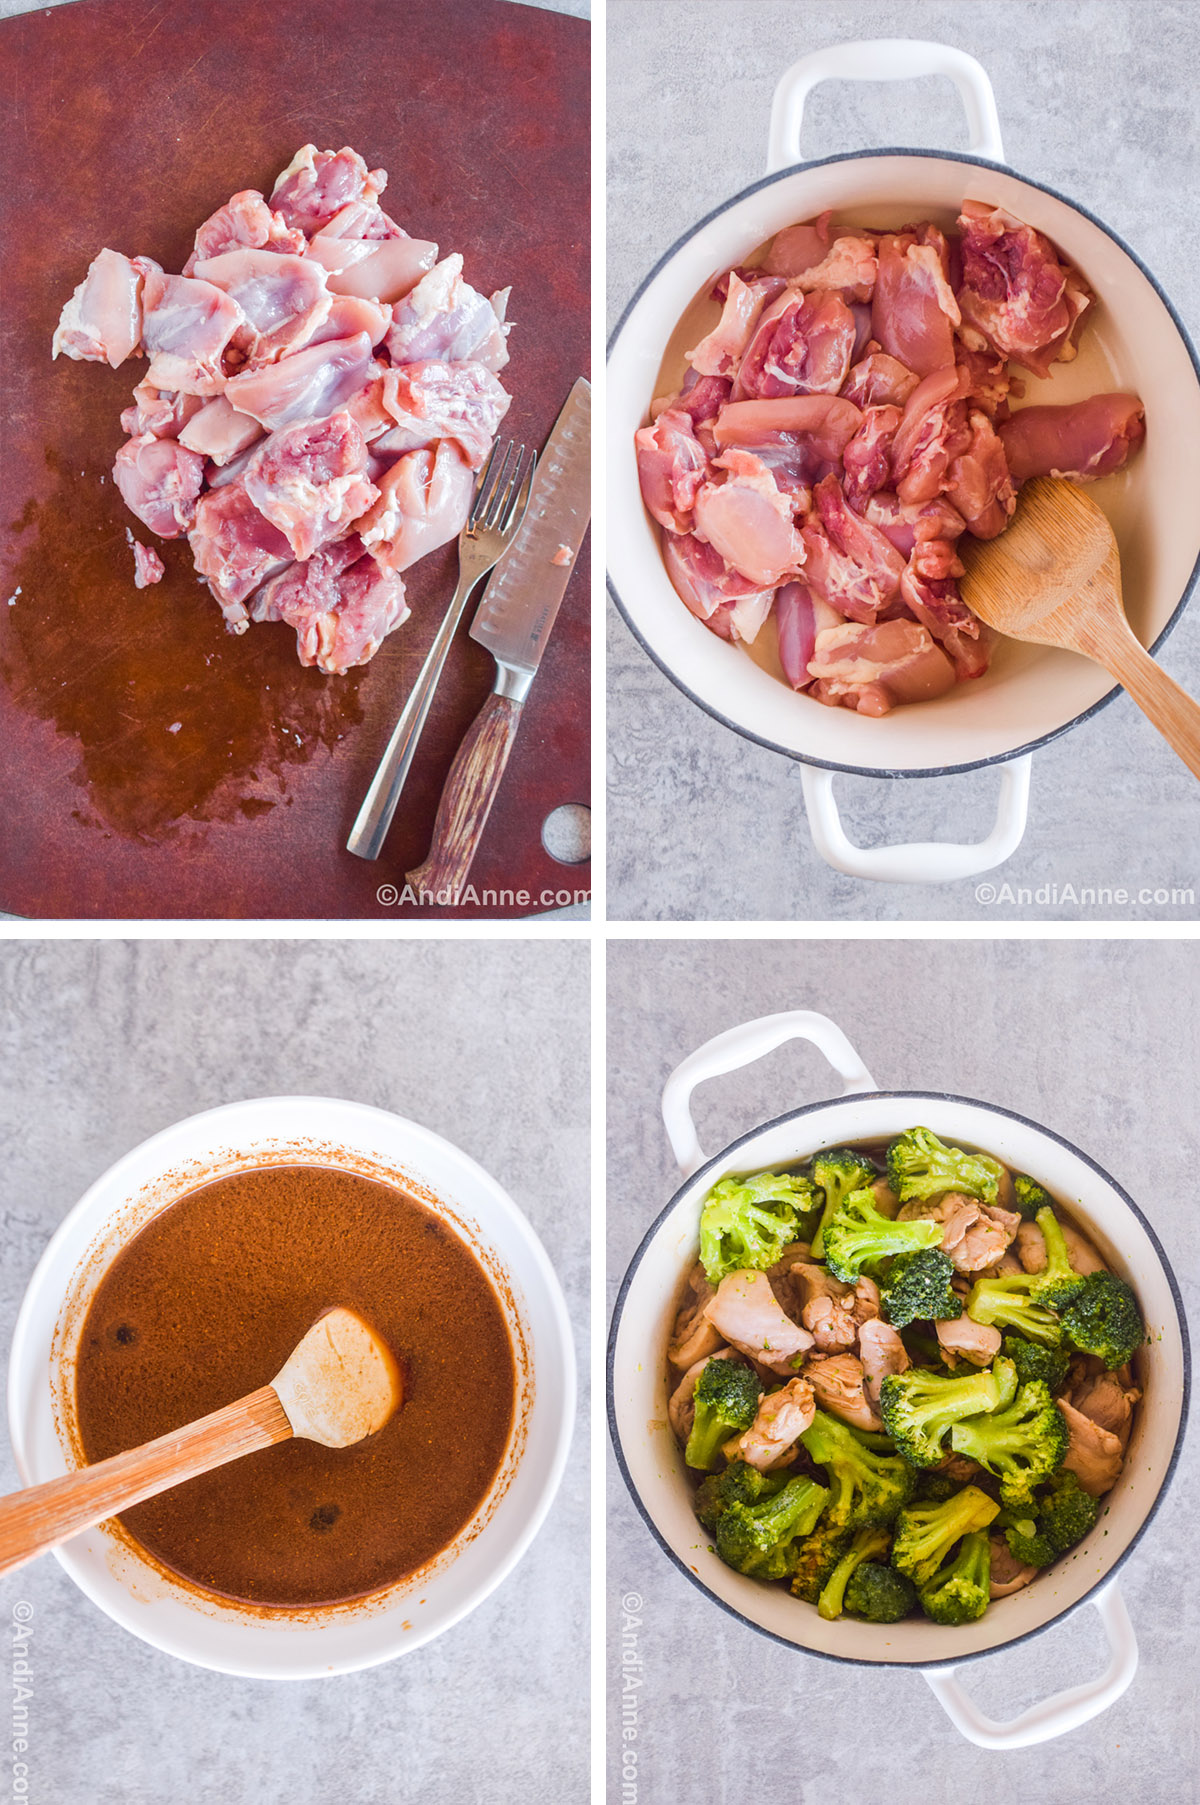 Four images showing steps to make the recipe. First is chopped chicken thighs on a cutting board with a knife. Second is chopped chicken in a white pot with a wood spatula. Third is brown sauce in a white bowl with a small spatula. Fourth is cooked chicken thighs and broccoli in a white pot.